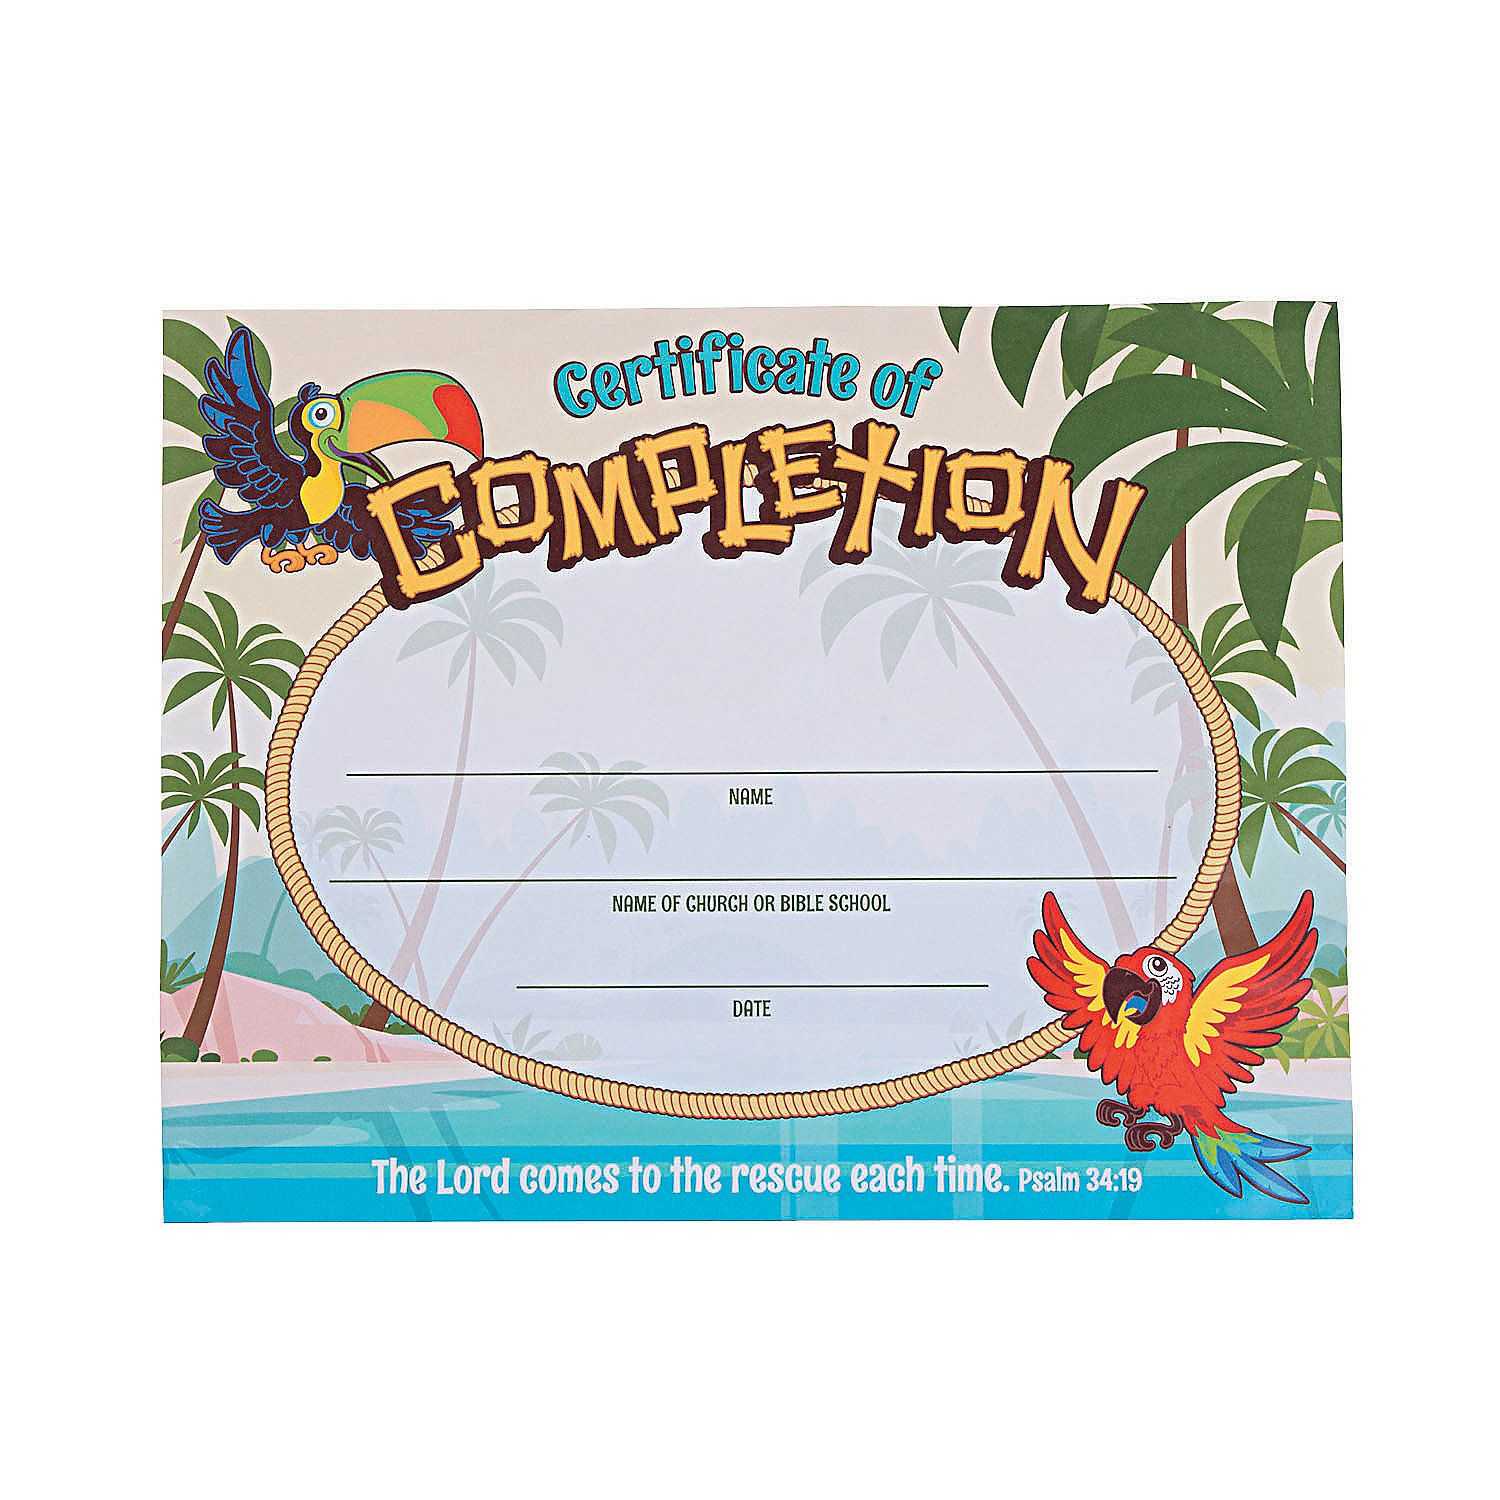 Island Vbs Certificates Of Completion | Certificate Of Regarding Vbs Certificate Template